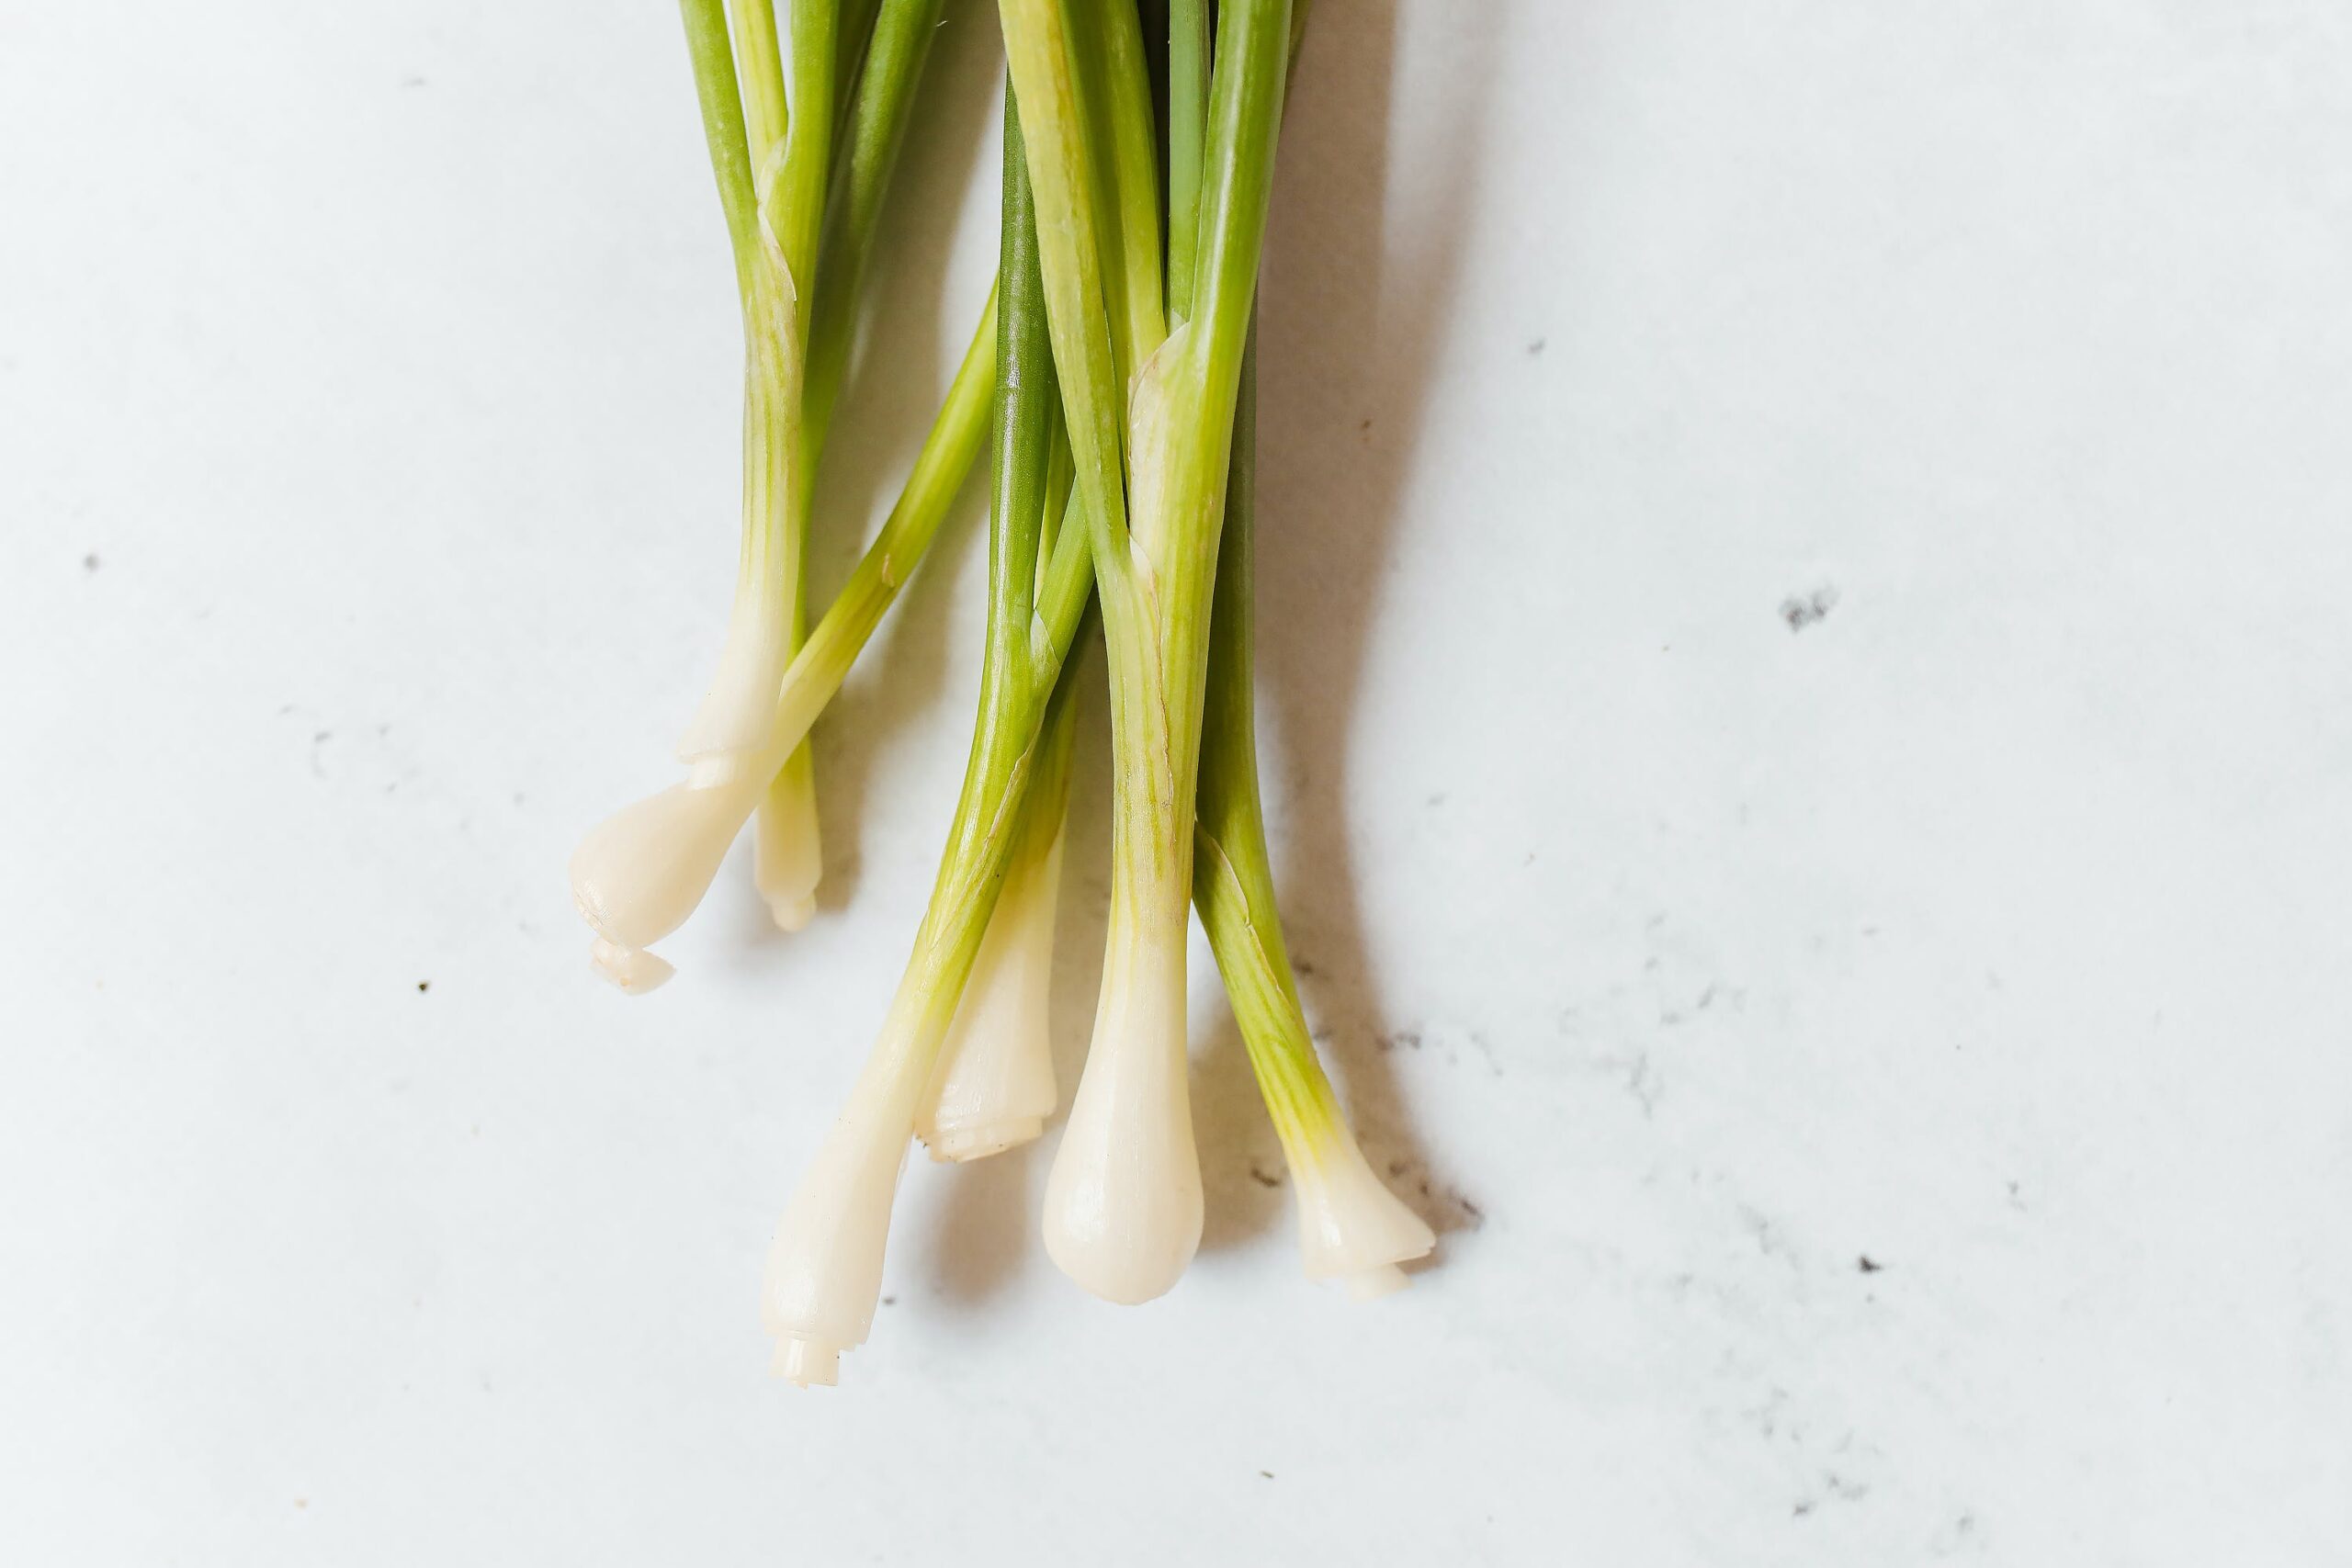 Onions, green, spring or scallions (includes tops and bulb), raw